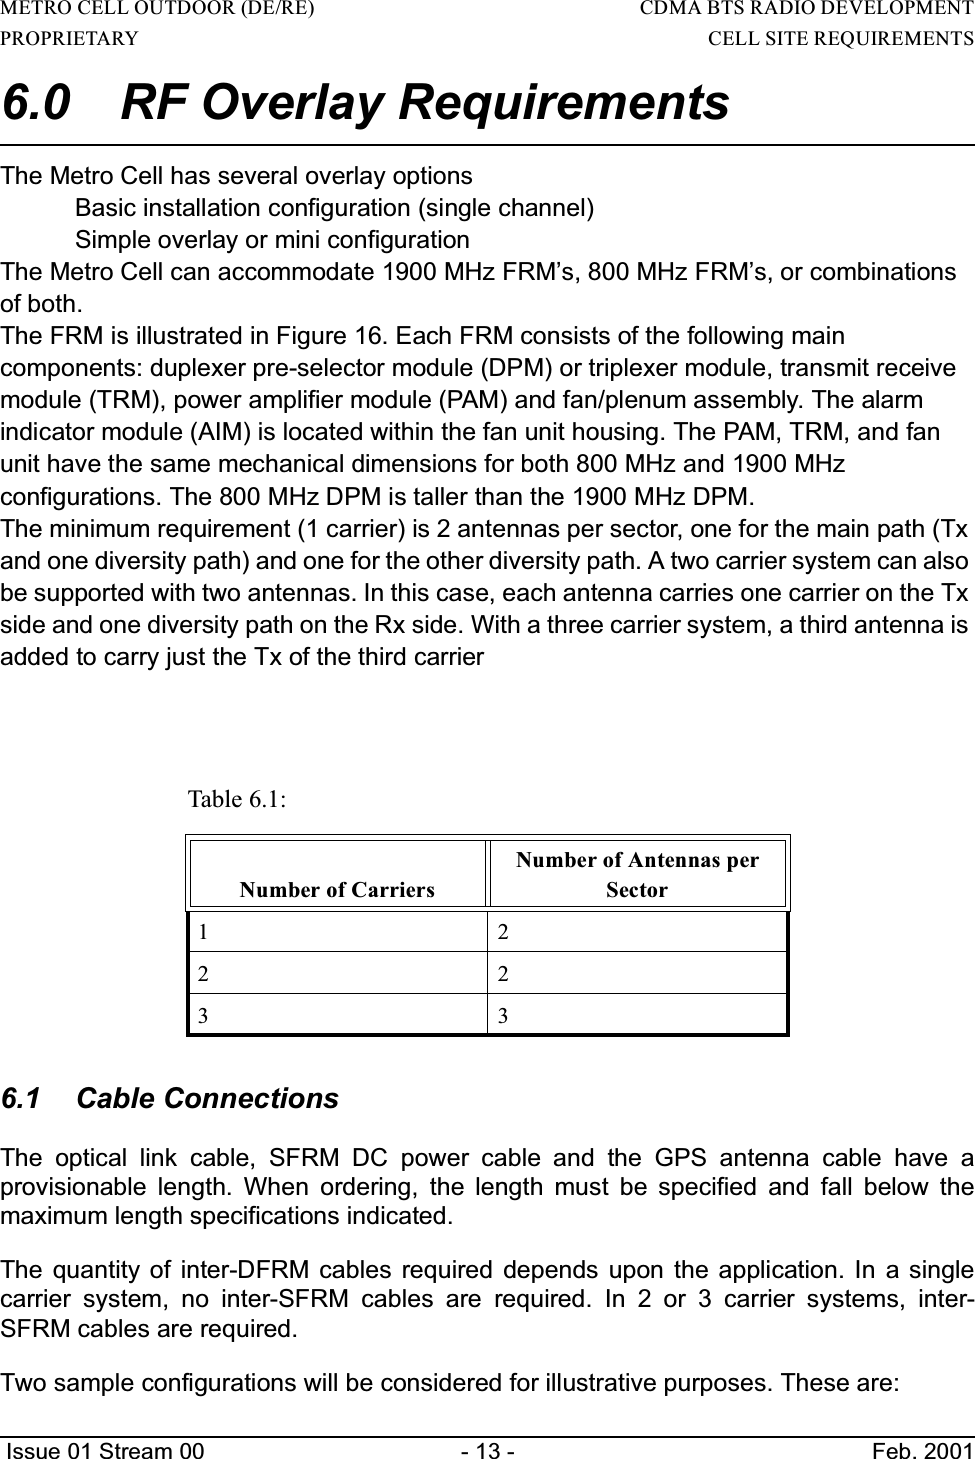 METRO CELL OUTDOOR (DE/RE)                                                                     CDMA BTS RADIO DEVELOPMENTPROPRIETARY                                                                                                                        CELL SITE REQUIREMENTS Issue 01 Stream 00 - 13 - Feb. 20016.0  RF Overlay RequirementsThe Metro Cell has several overlay options Basic installation configuration (single channel)Simple overlay or mini configuration The Metro Cell can accommodate 1900 MHz FRM’s, 800 MHz FRM’s, or combinations of both.The FRM is illustrated in Figure 16. Each FRM consists of the following maincomponents: duplexer pre-selector module (DPM) or triplexer module, transmit receivemodule (TRM), power amplifier module (PAM) and fan/plenum assembly. The alarmindicator module (AIM) is located within the fan unit housing. The PAM, TRM, and fanunit have the same mechanical dimensions for both 800 MHz and 1900 MHzconfigurations. The 800 MHz DPM is taller than the 1900 MHz DPM.The minimum requirement (1 carrier) is 2 antennas per sector, one for the main path (Tx and one diversity path) and one for the other diversity path. A two carrier system can also be supported with two antennas. In this case, each antenna carries one carrier on the Tx side and one diversity path on the Rx side. With a three carrier system, a third antenna is added to carry just the Tx of the third carrier6.1 Cable ConnectionsThe optical link cable, SFRM DC power cable and the GPS antenna cable have aprovisionable length. When ordering, the length must be specified and fall below themaximum length specifications indicated.The quantity of inter-DFRM cables required depends upon the application. In a singlecarrier system, no inter-SFRM cables are required. In 2 or 3 carrier systems, inter-SFRM cables are required.Two sample configurations will be considered for illustrative purposes. These are:Table 6.1:  Number of CarriersNumber of Antennas per Sector122233